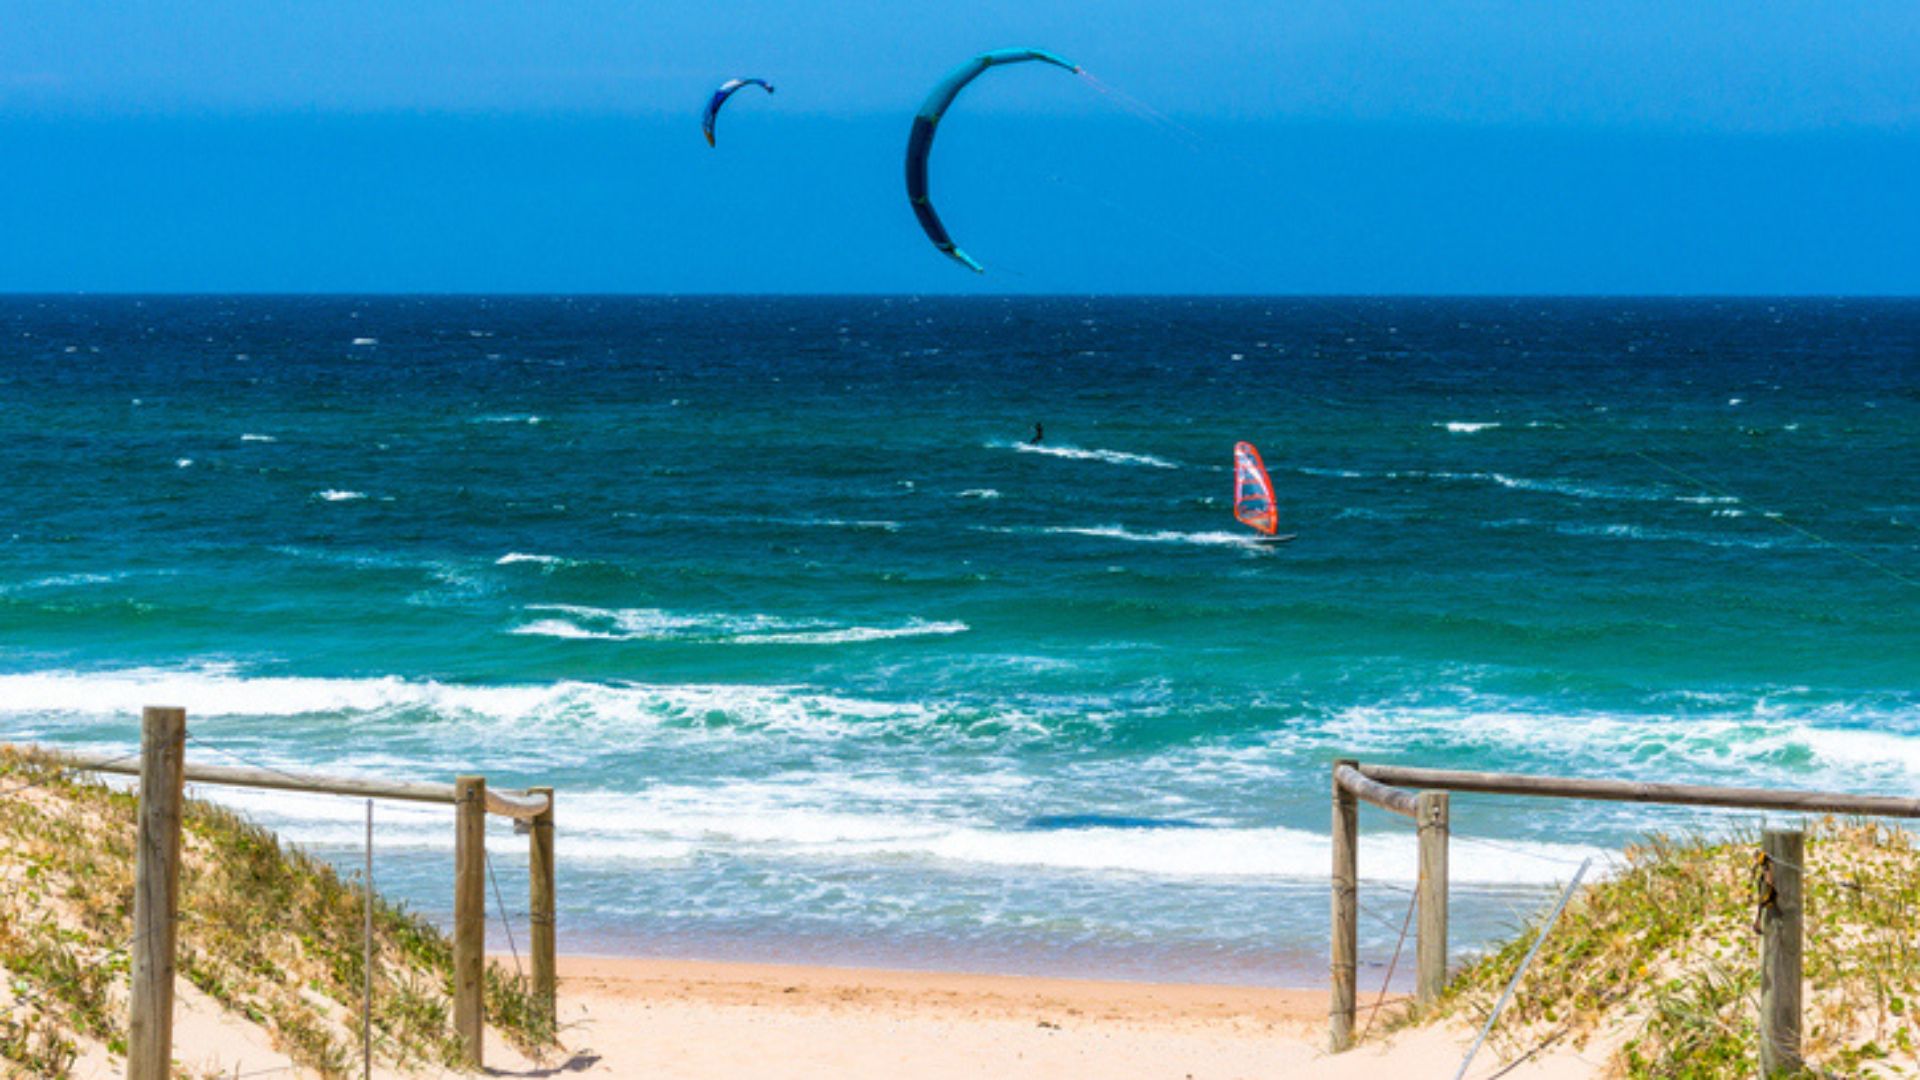 Cronulla Beach is Sydney's longest beach and is a perfect family location